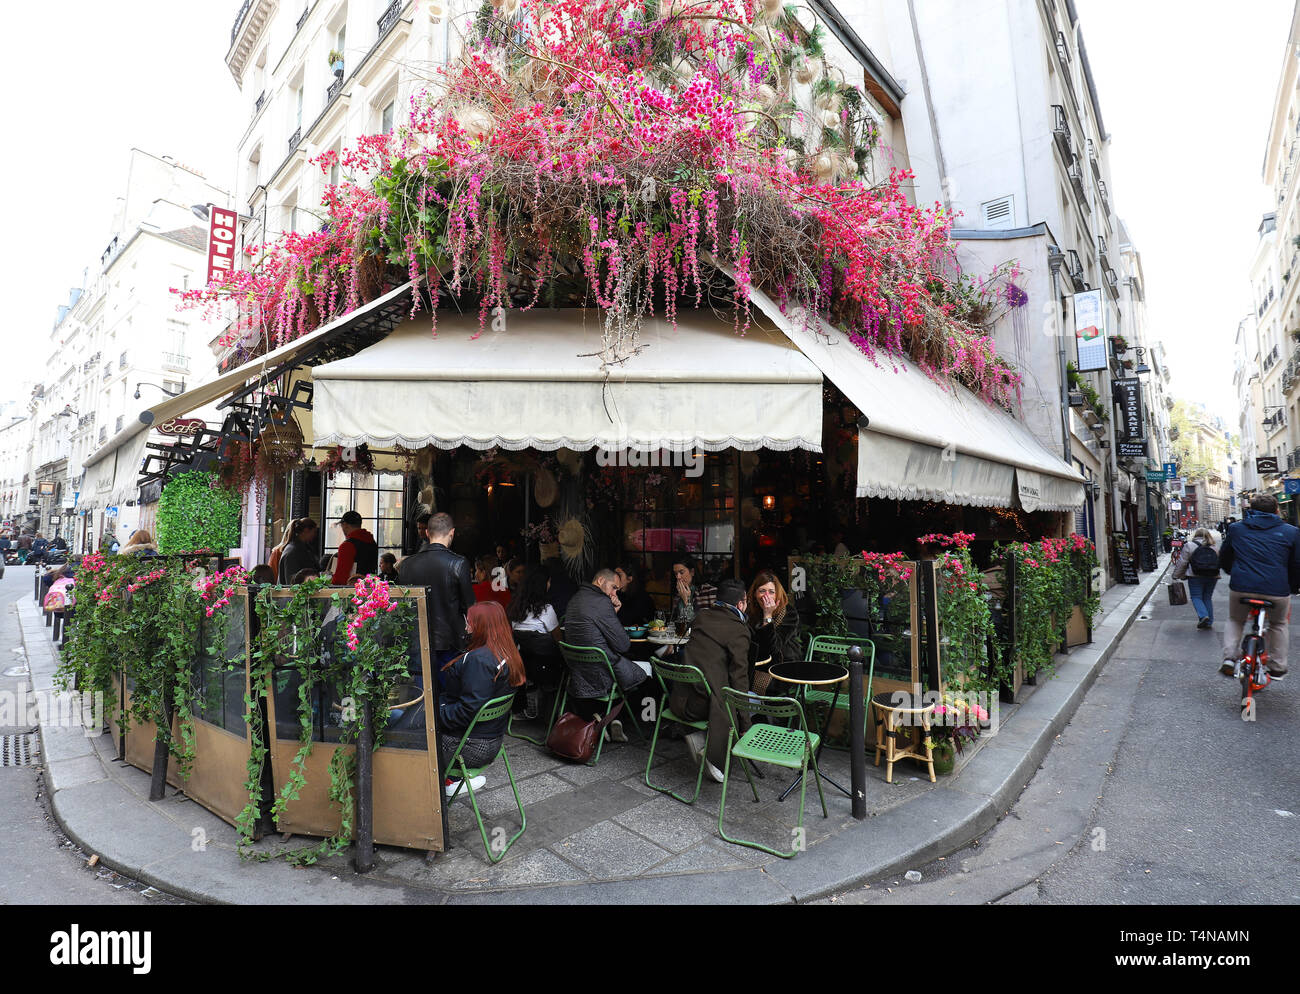 The traditional French cafe Maison sauvage located near Saint Germain boulevard in Paris, France. Stock Photo